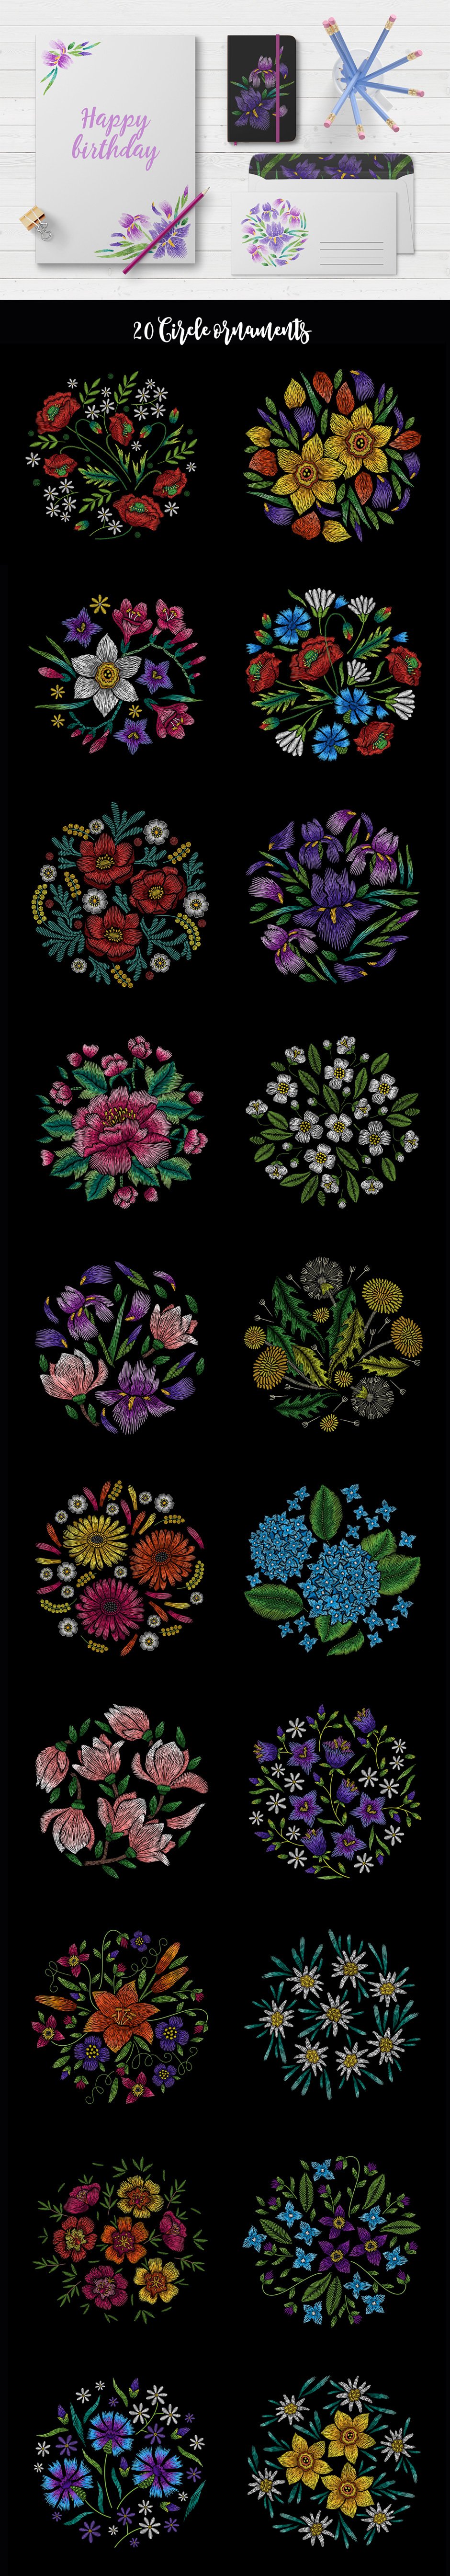 embroidery elements